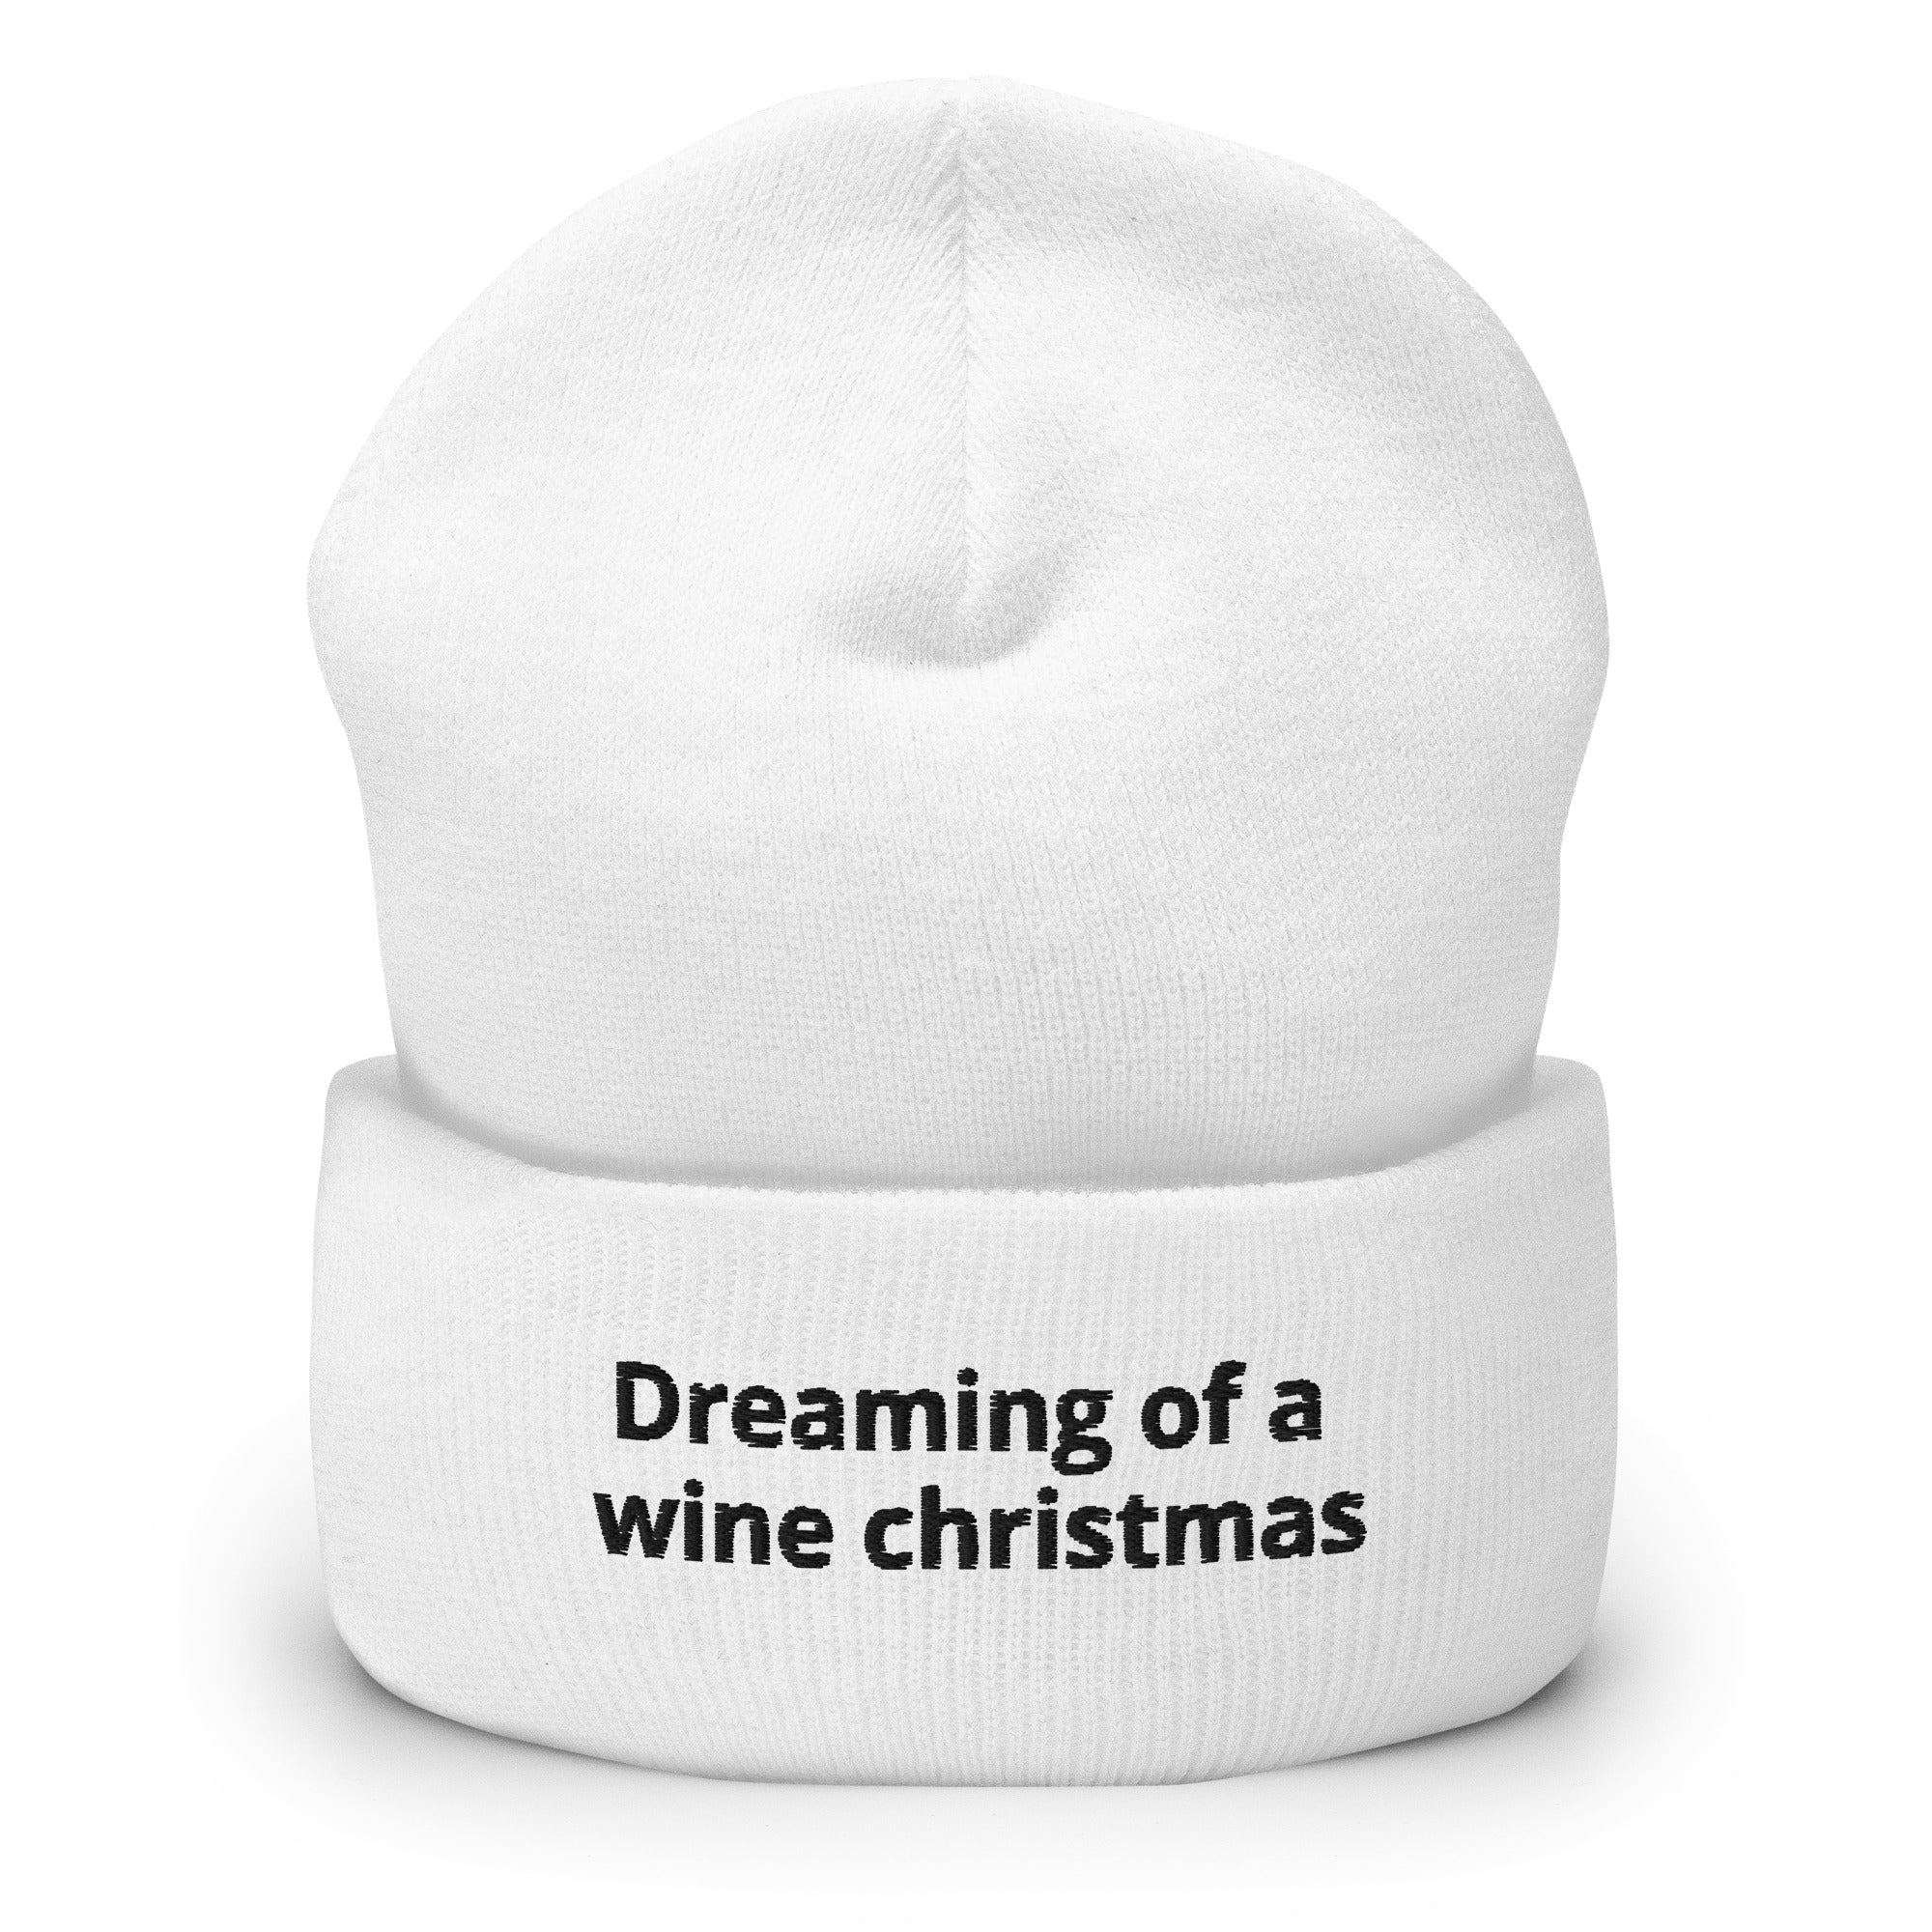 Dreaming of a Wine Christmas Beanie